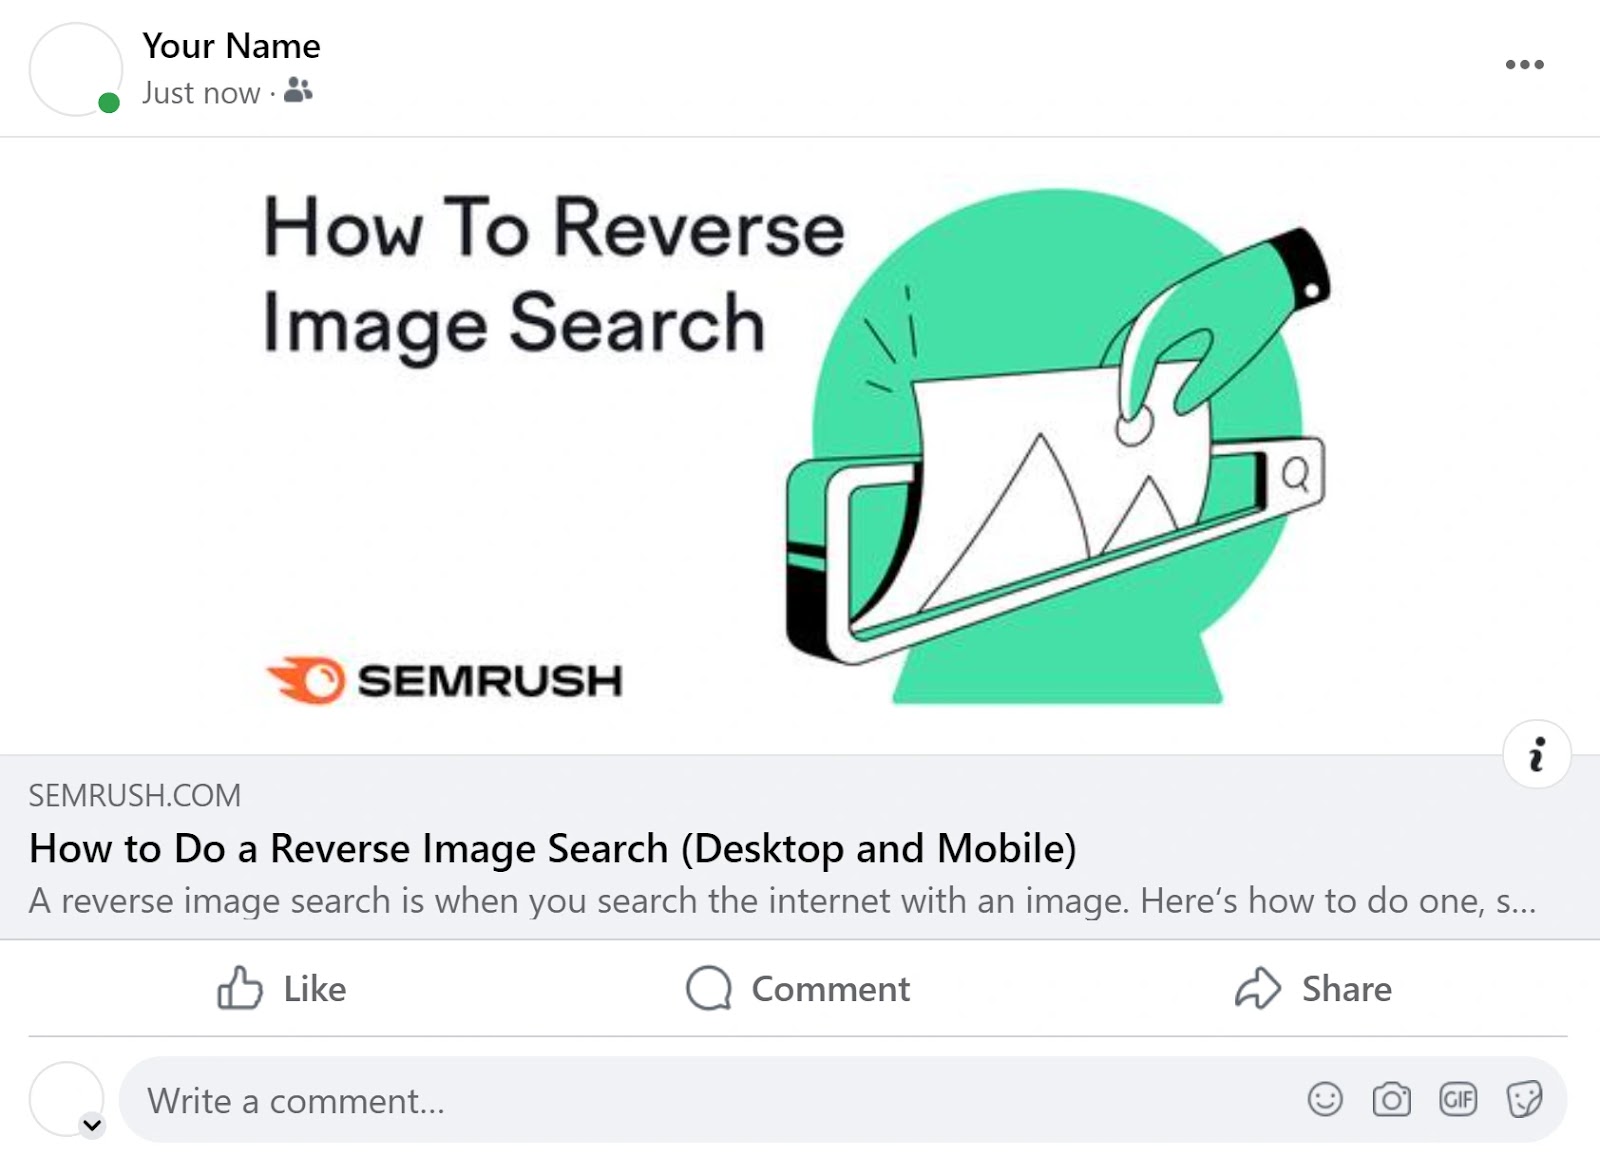 Semrush's blog post about reverse image search shared on Facebook